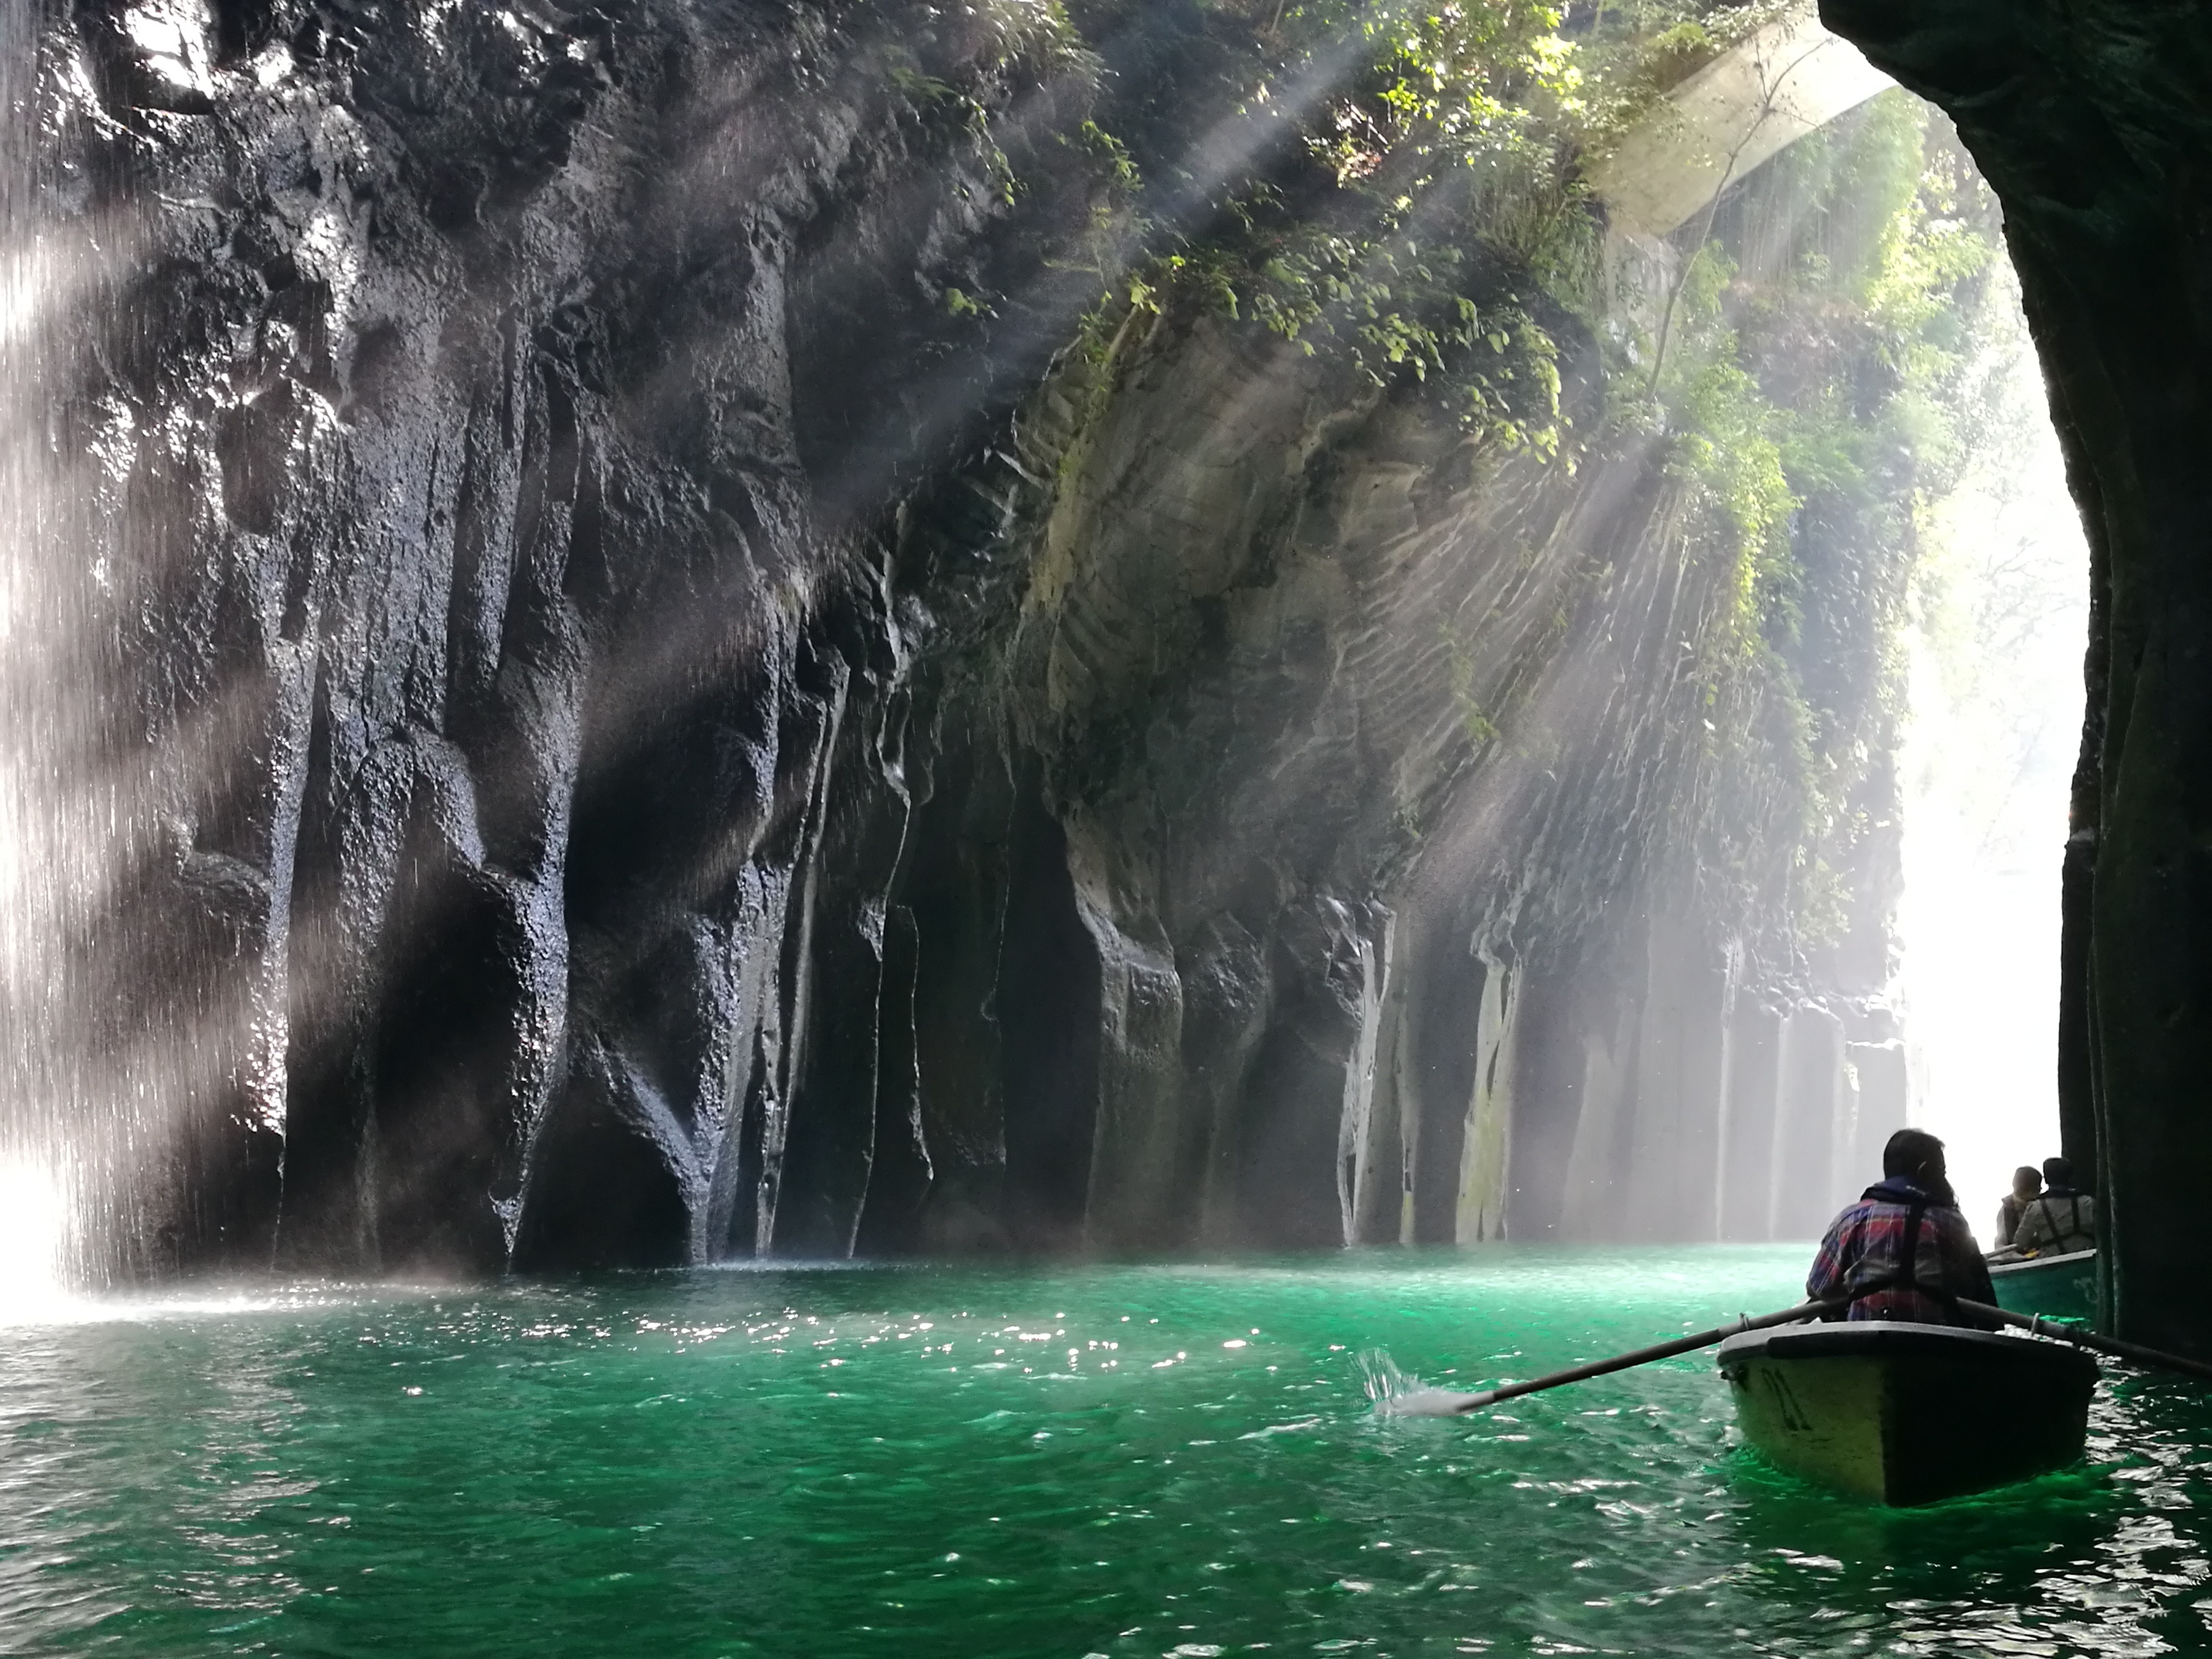 Rowing on Takachiho gorge